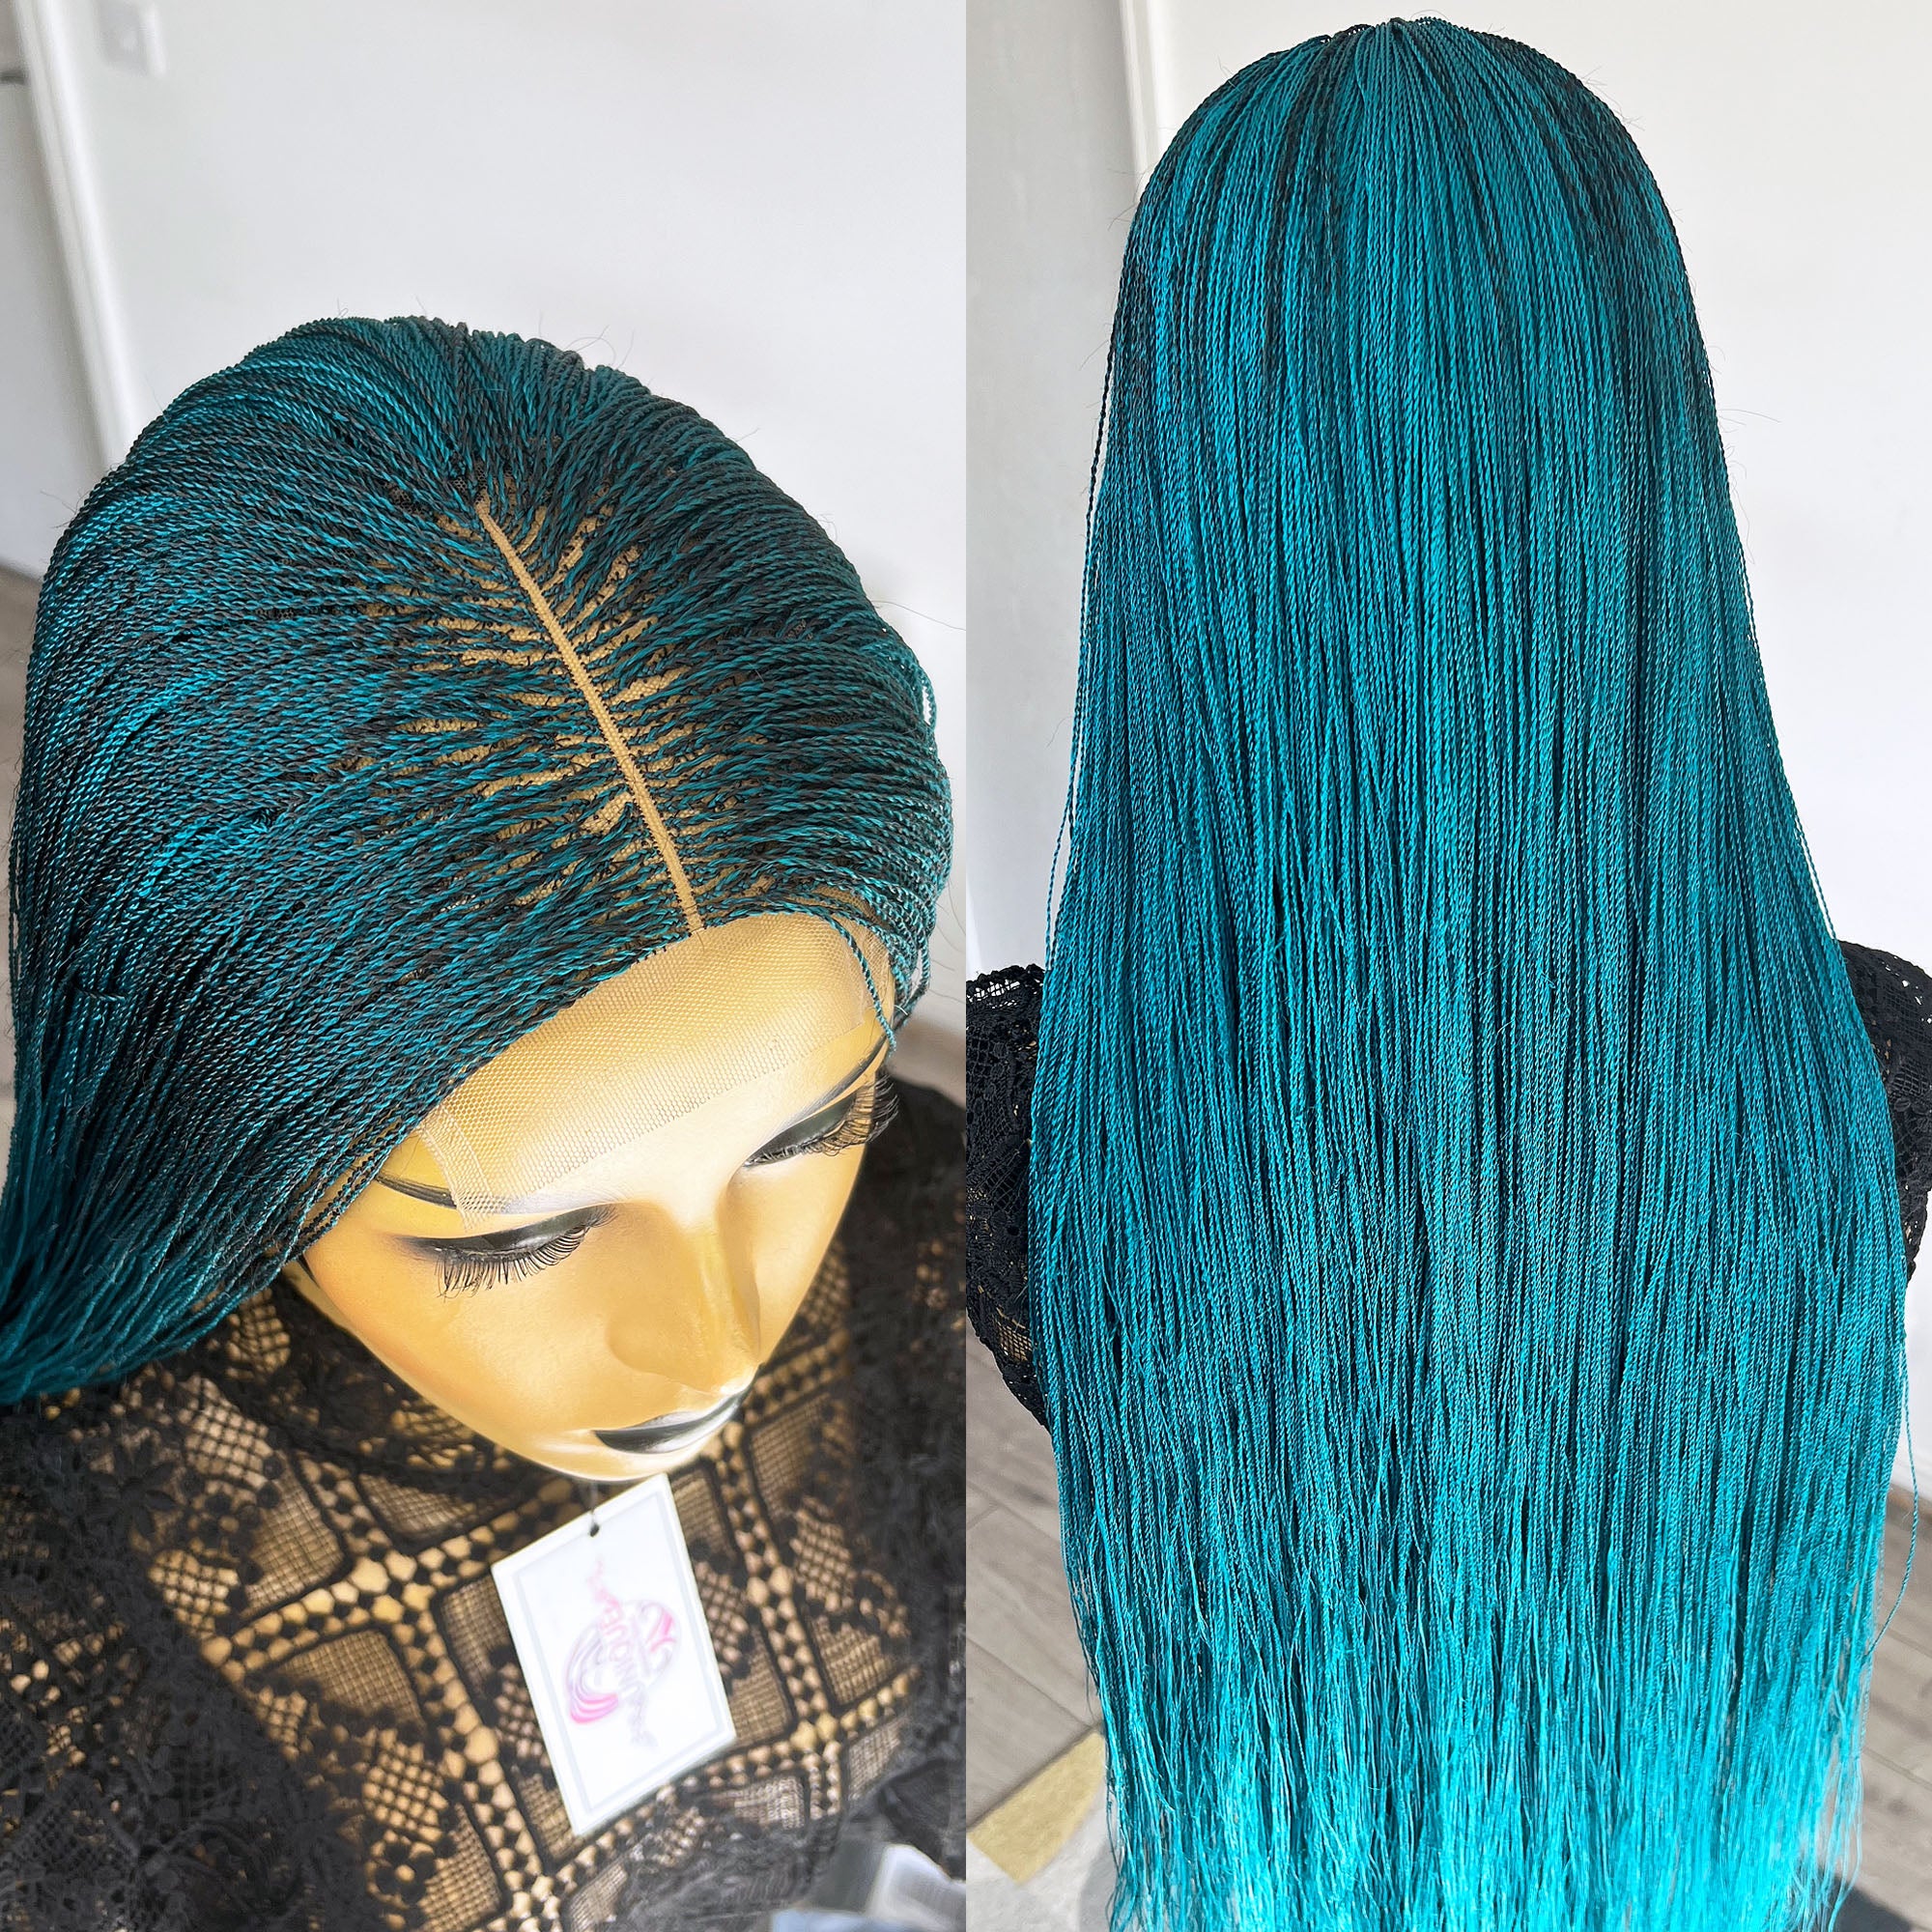 Unique Micro Needle Senegalese Twists Braided Wig - Teal